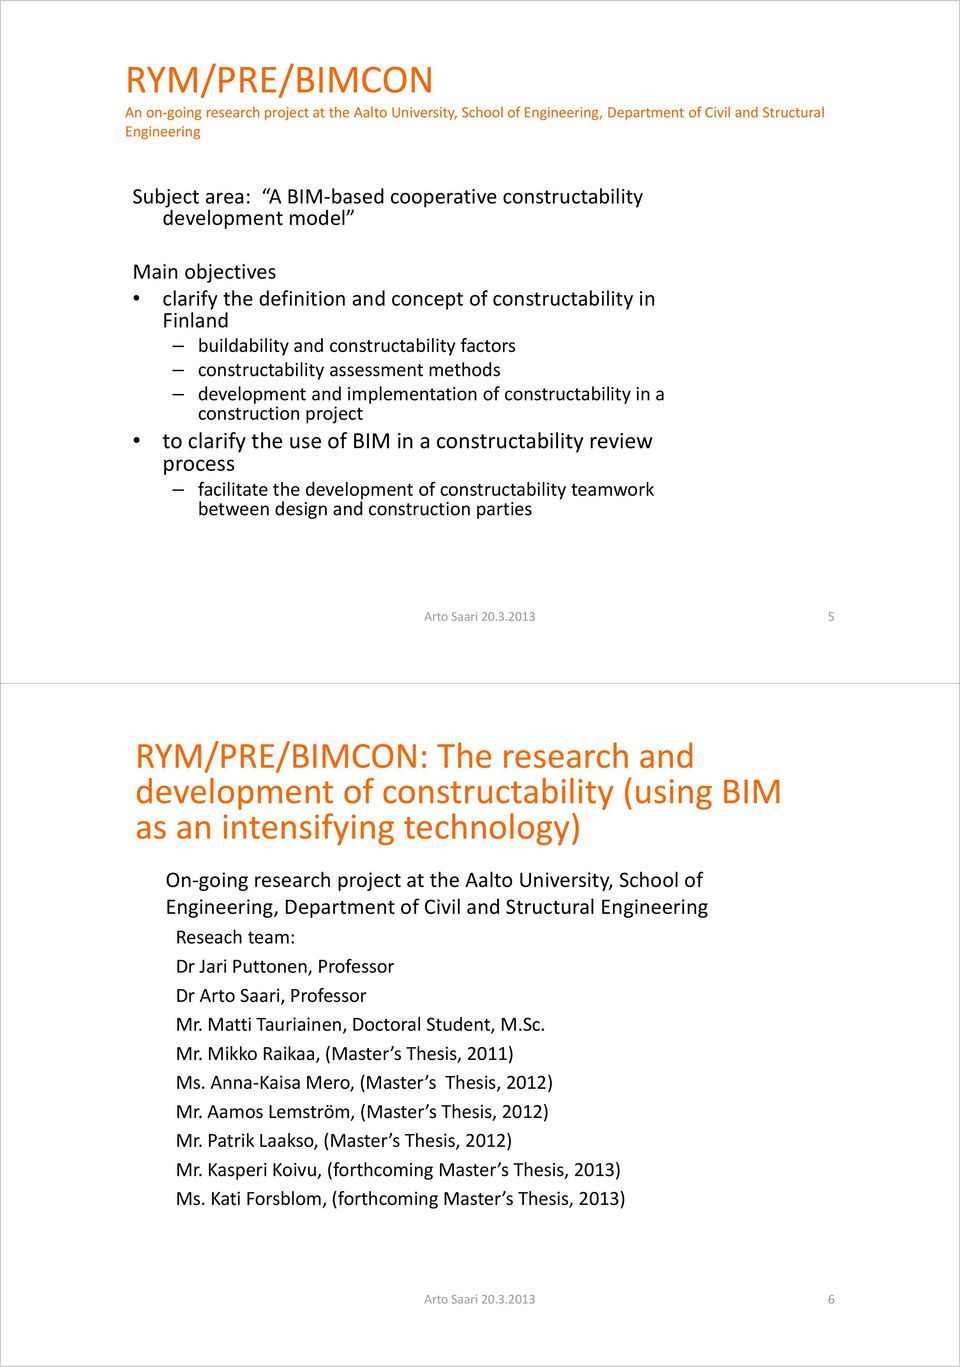 implementation of constructability in a construction project to clarify the use of BIM in a constructability review process facilitate the development of constructability teamwork between design and